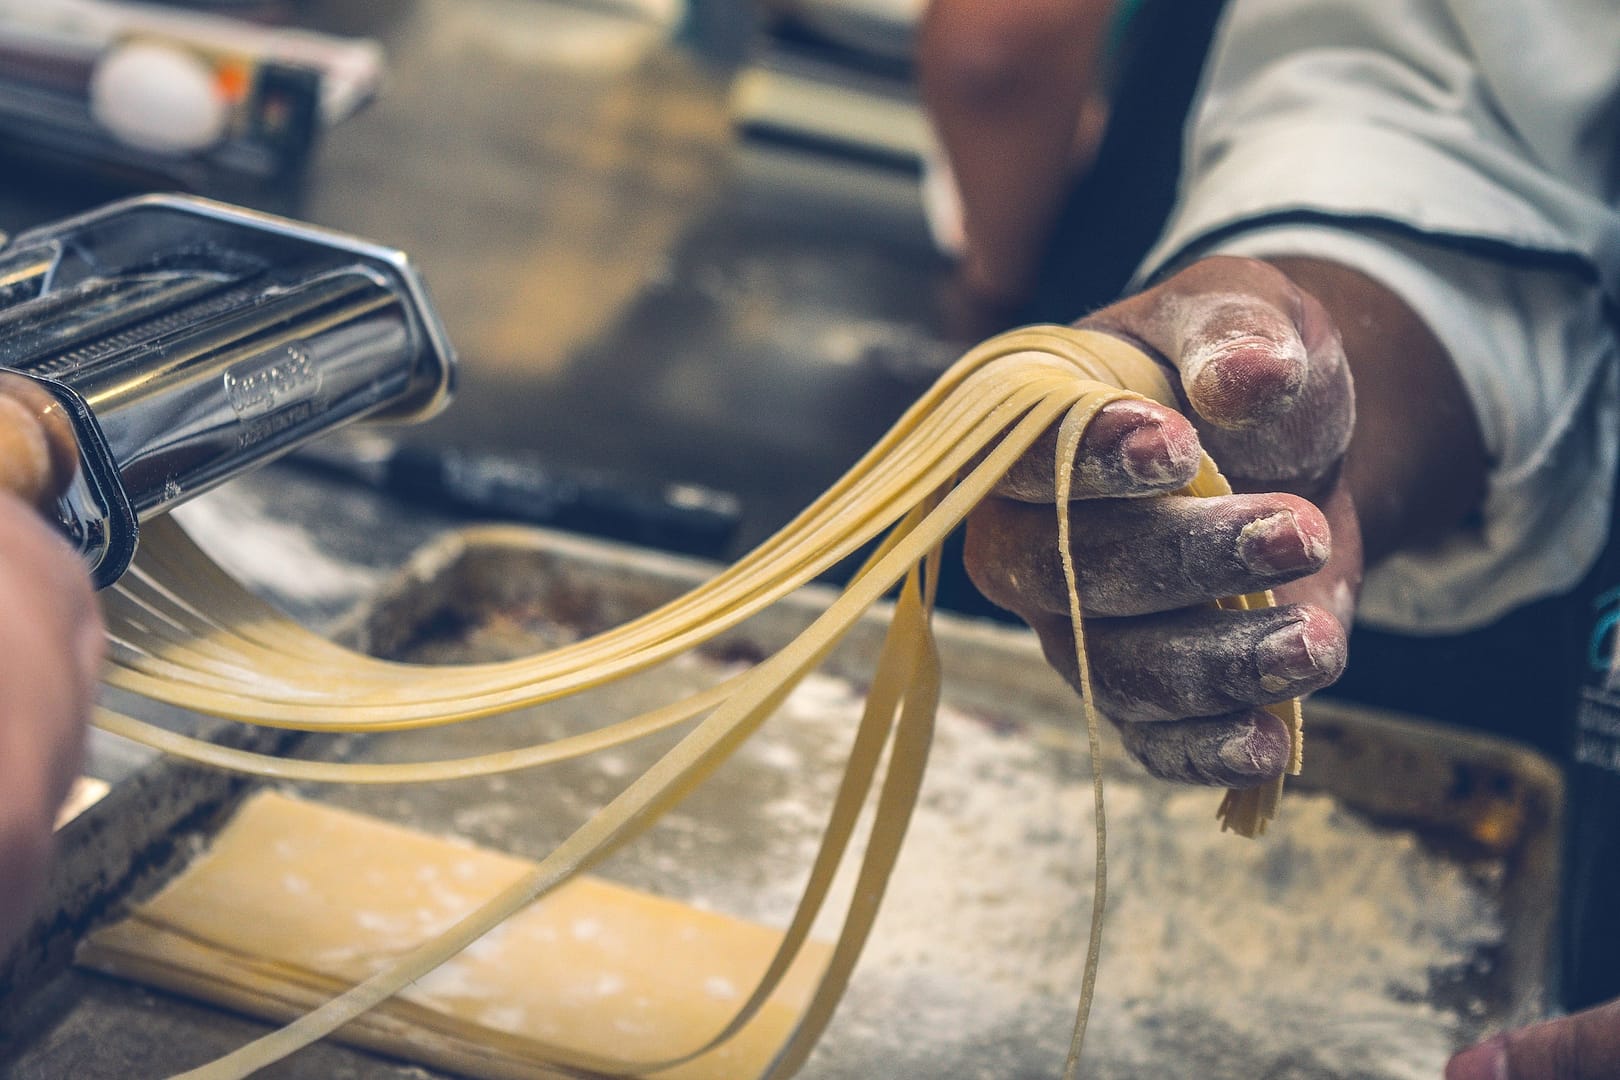 Pasta making in Tuscany, Italy during a destination wedding